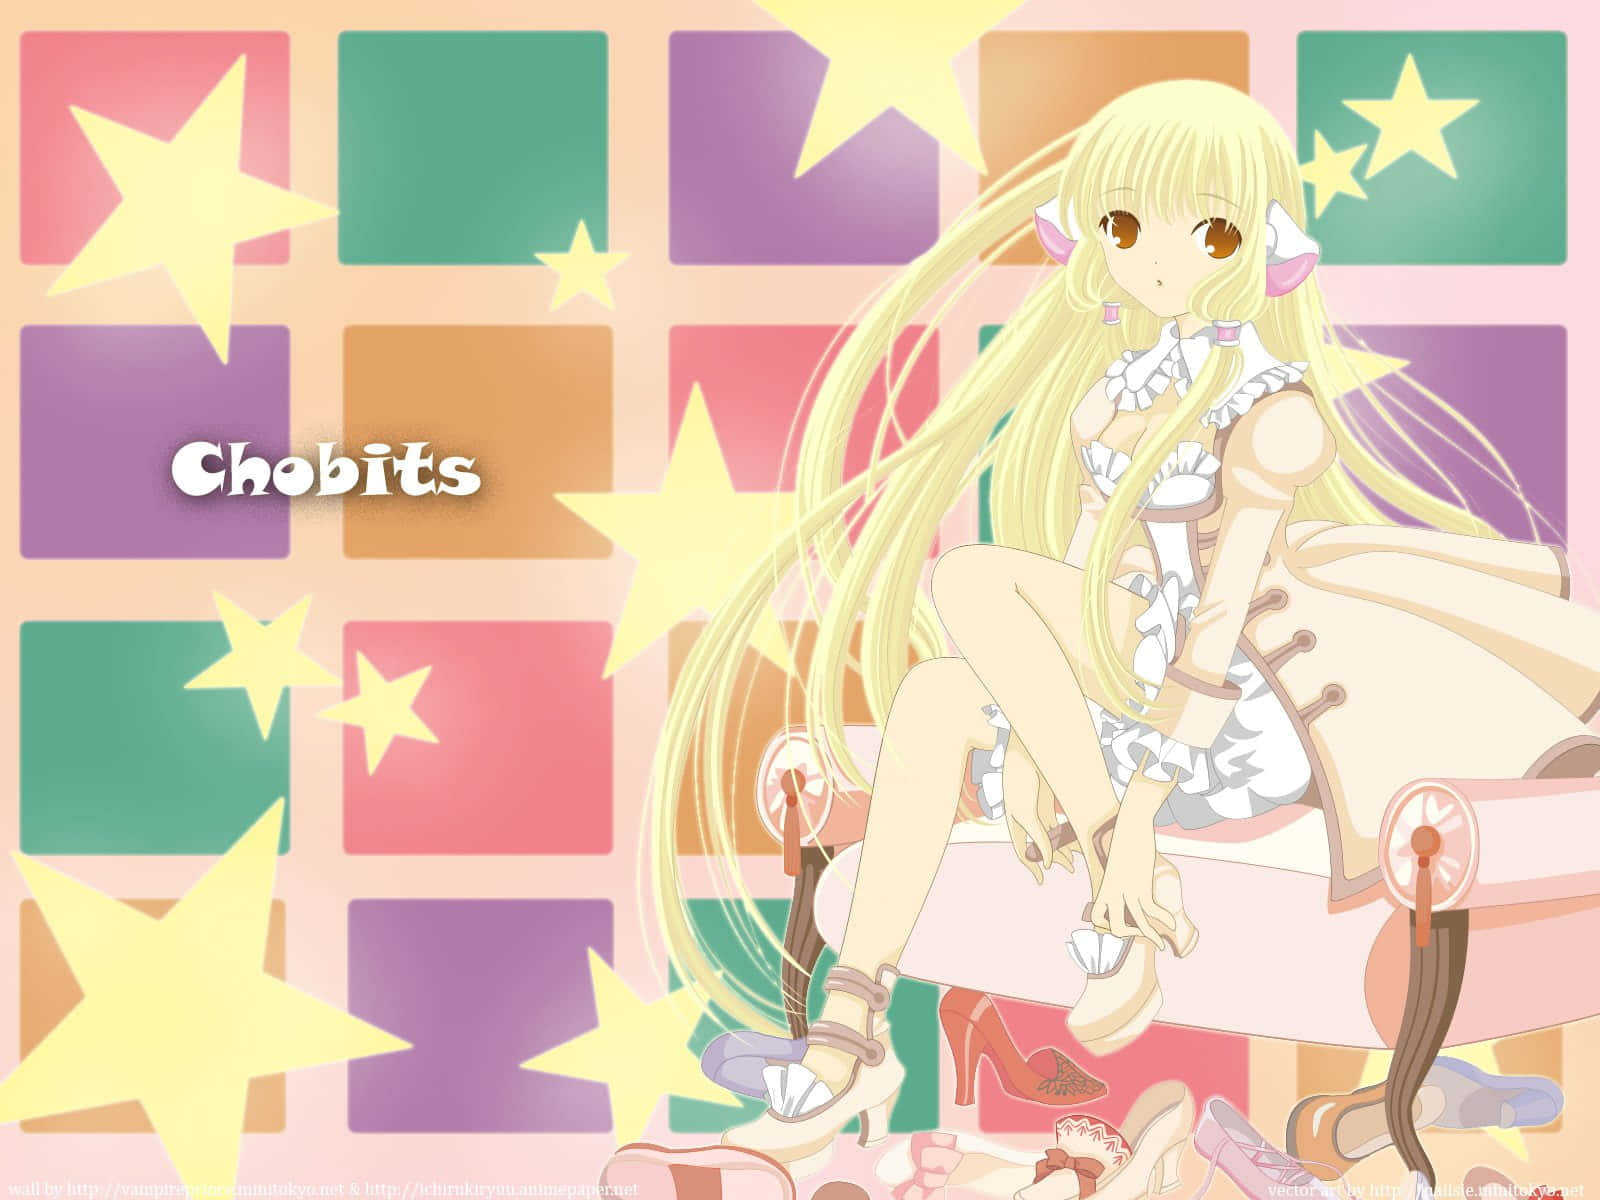 Chobits – A beautiful combination of technology and humanity